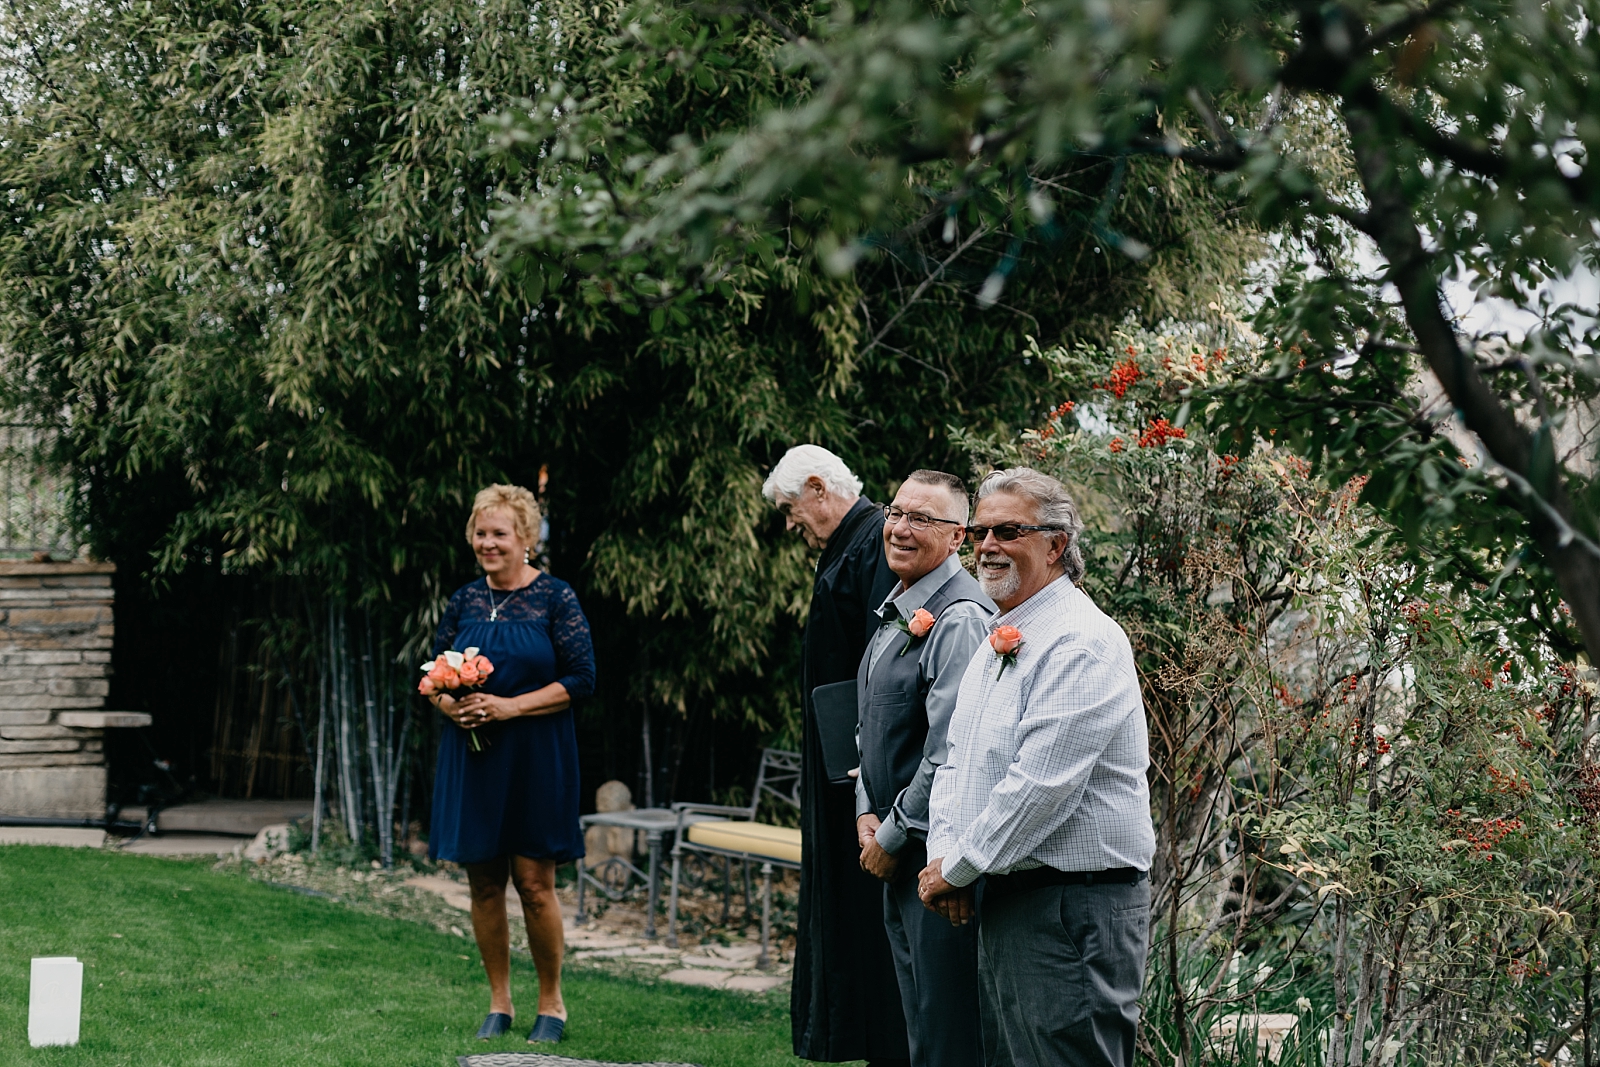 walk down the aisle groom's first look intimate garden ceremony bed and breakfast surgeon's house elopement photos jerome arizona samantha patri photography